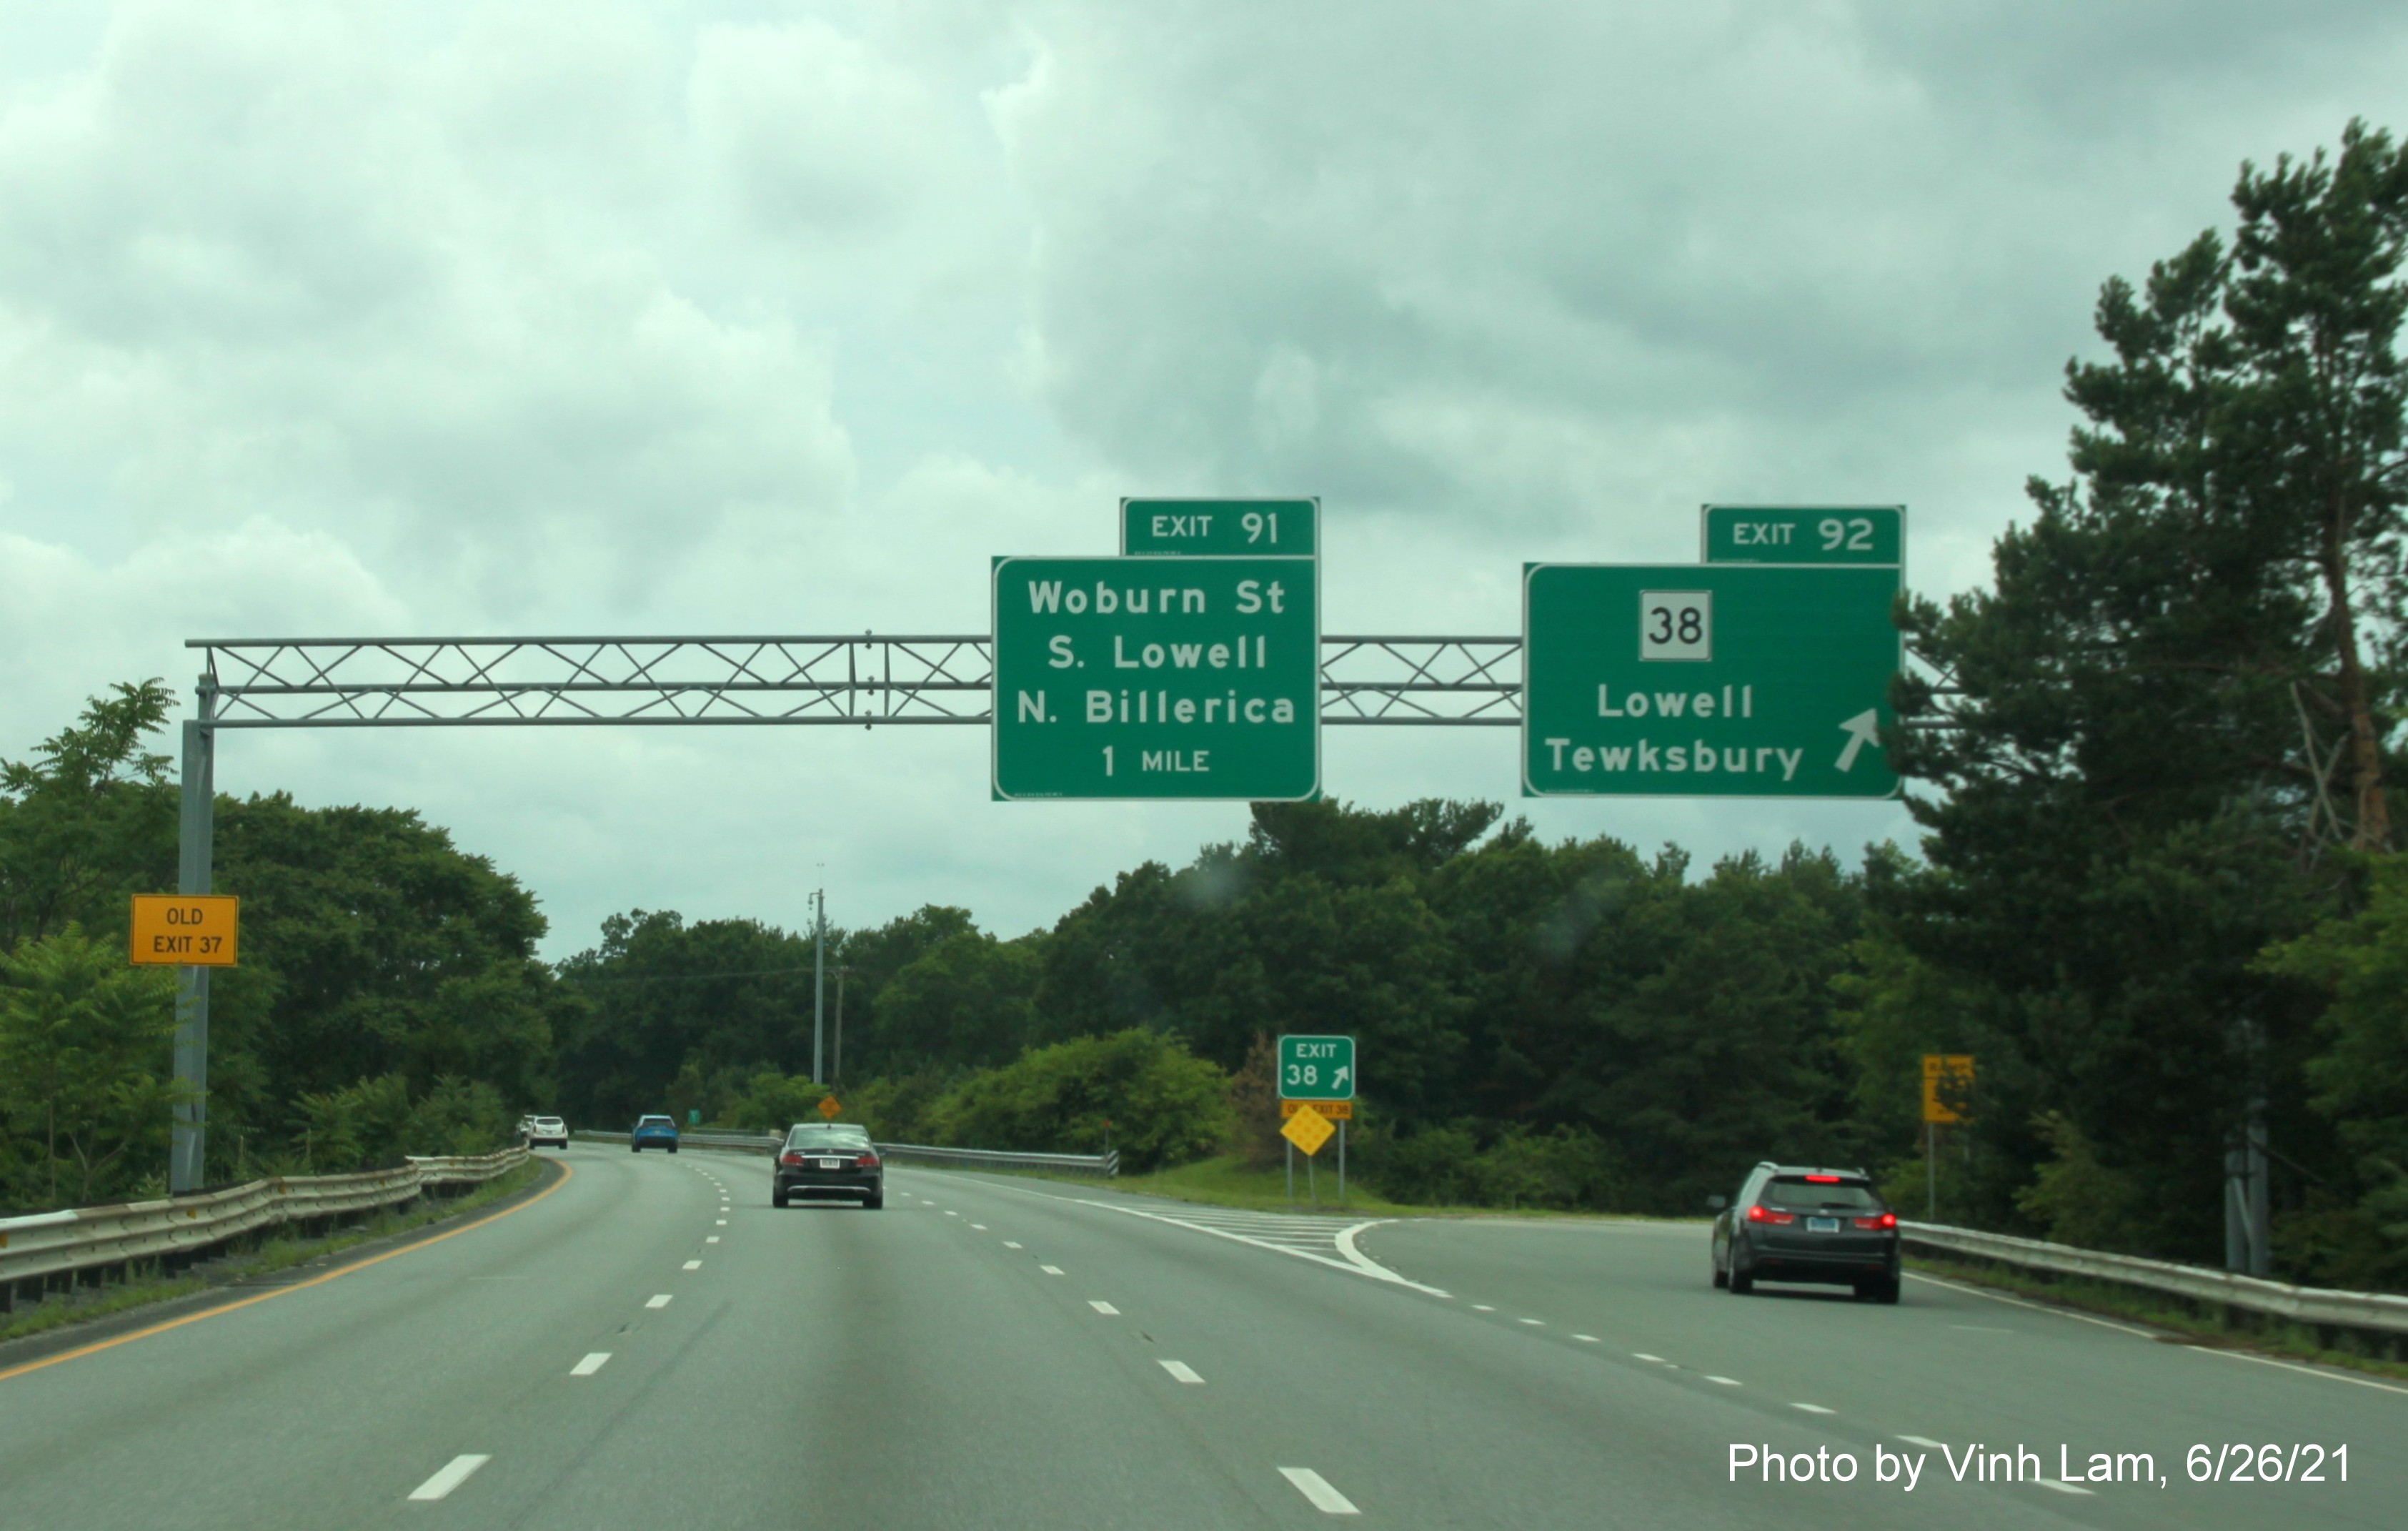 Image of overhead ramp sign for MA 38 exit with new milepost based exit number on I-495 South in Tewksbury, by Vinh Lam, June 2021